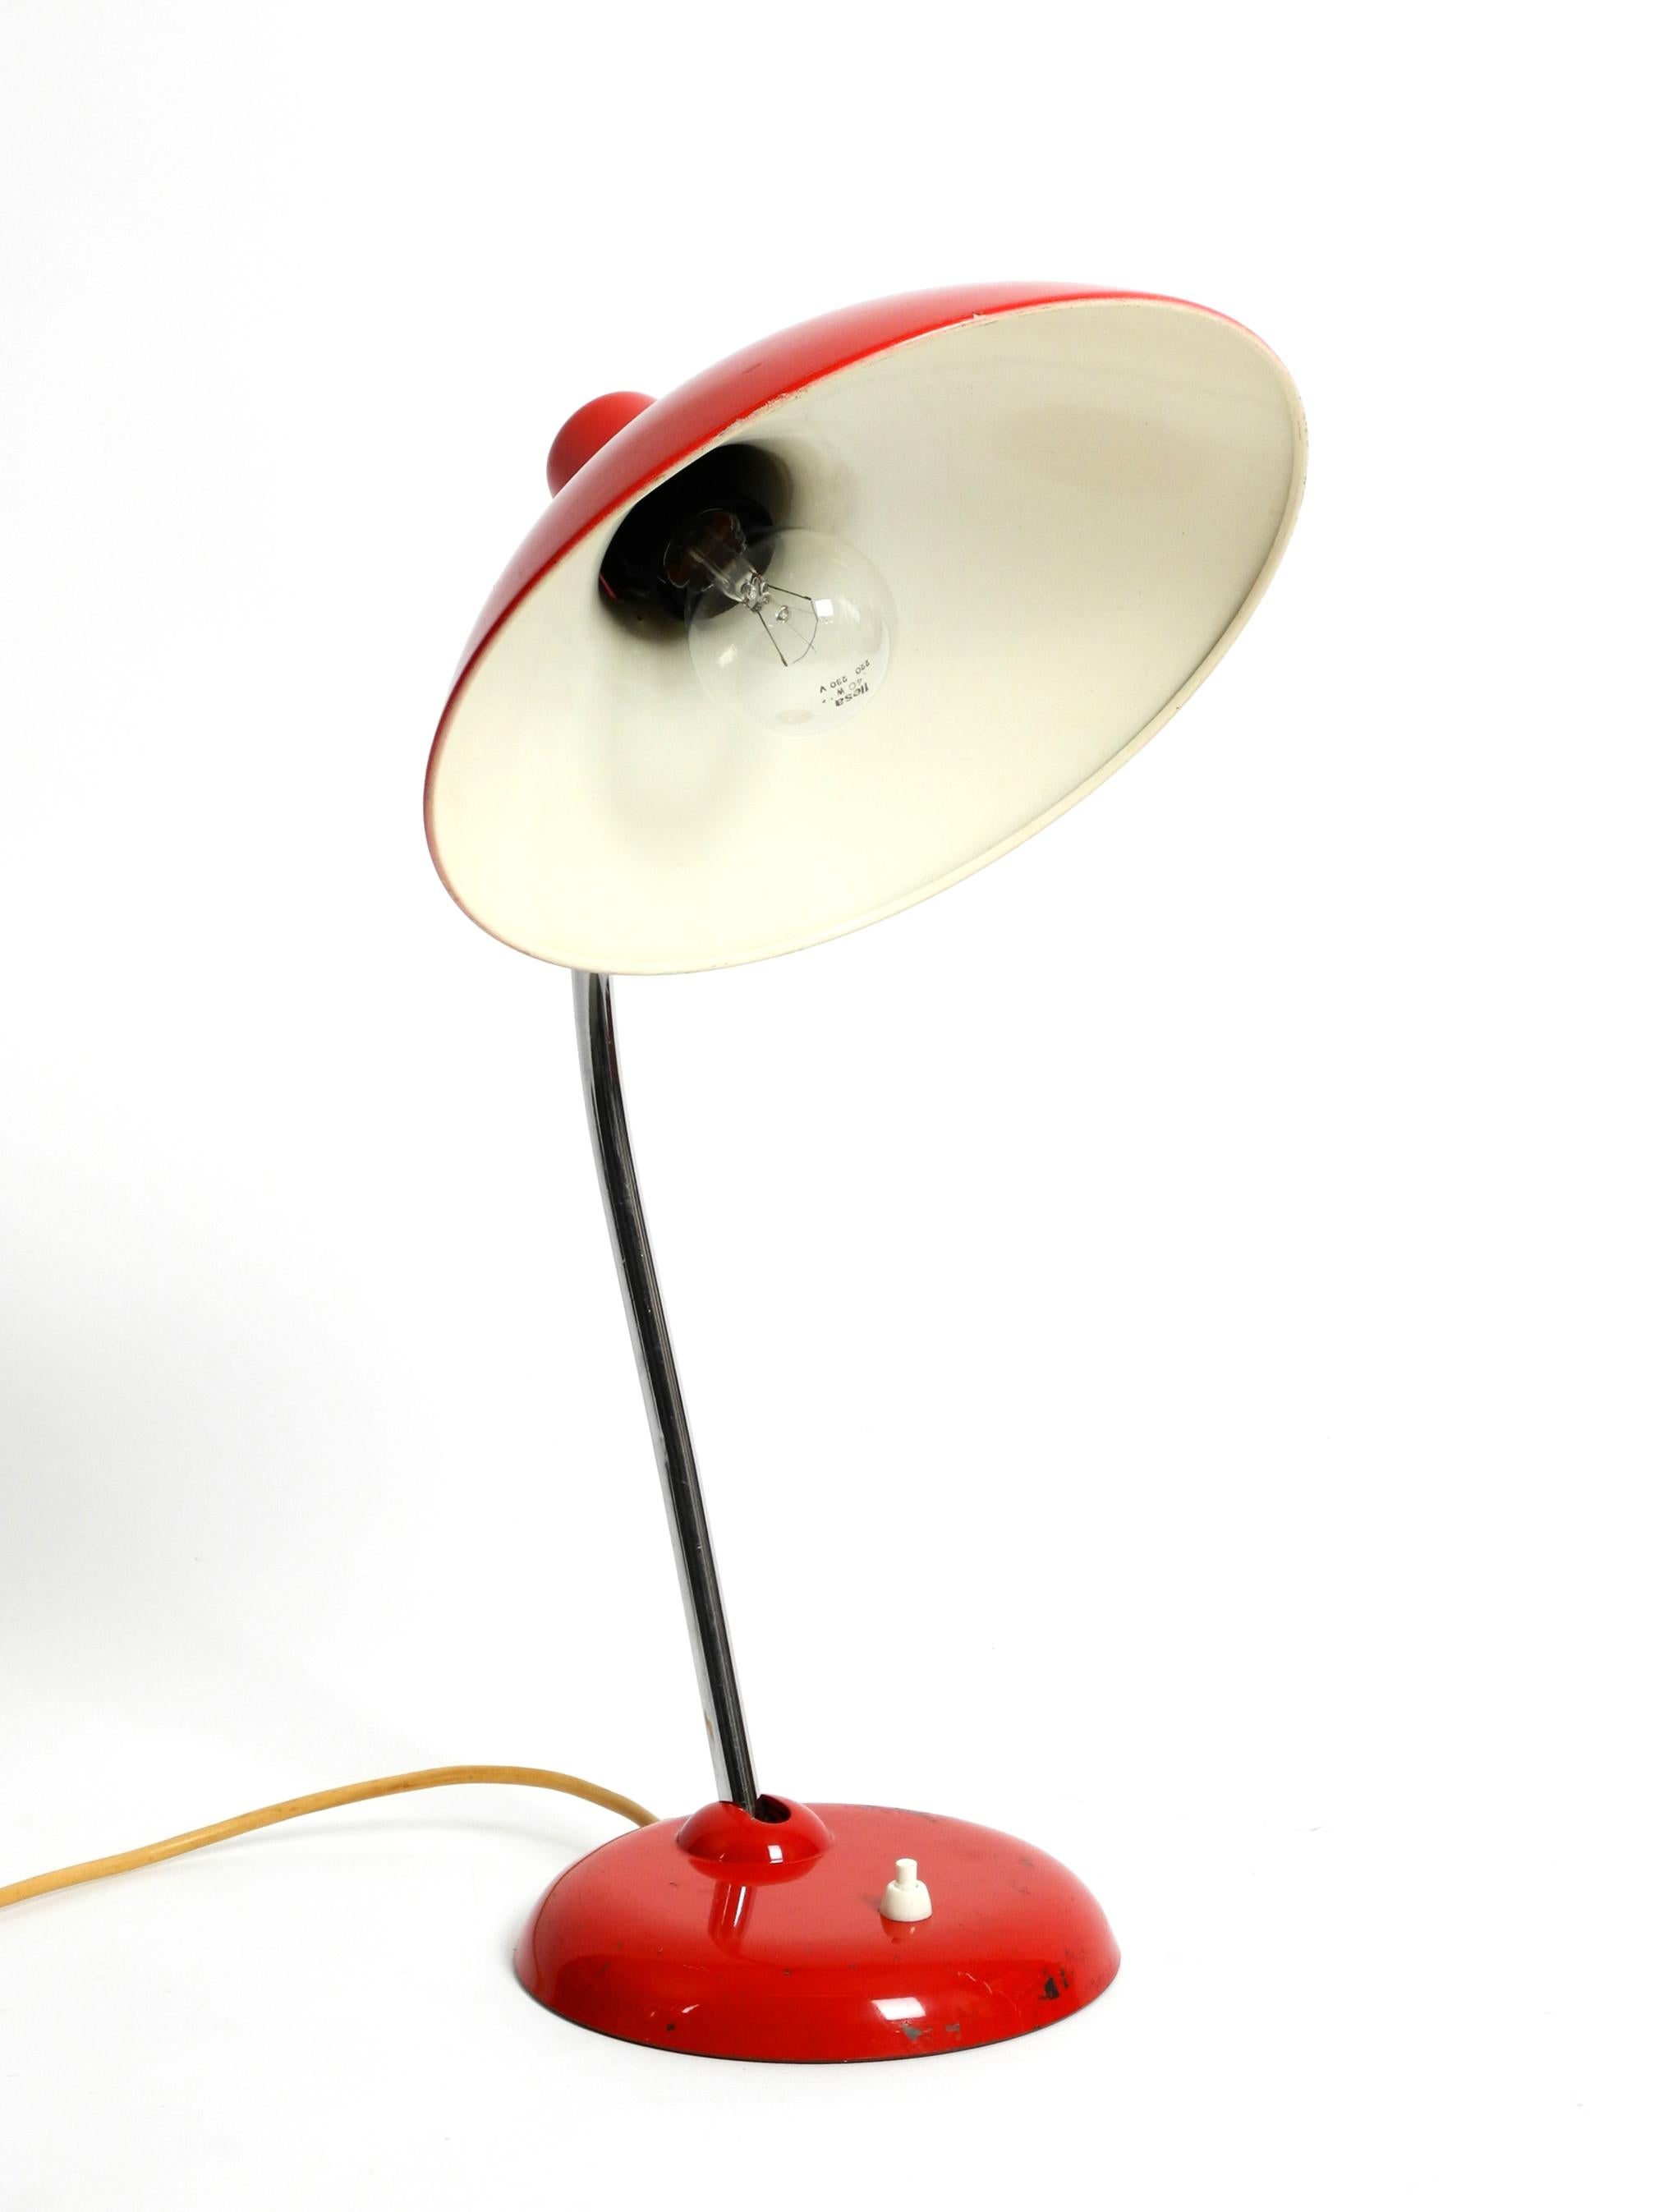 Mid-20th Century Original Classic Red Kaiser Idell Metal Table Lamp Model 6786 from the 1960s For Sale